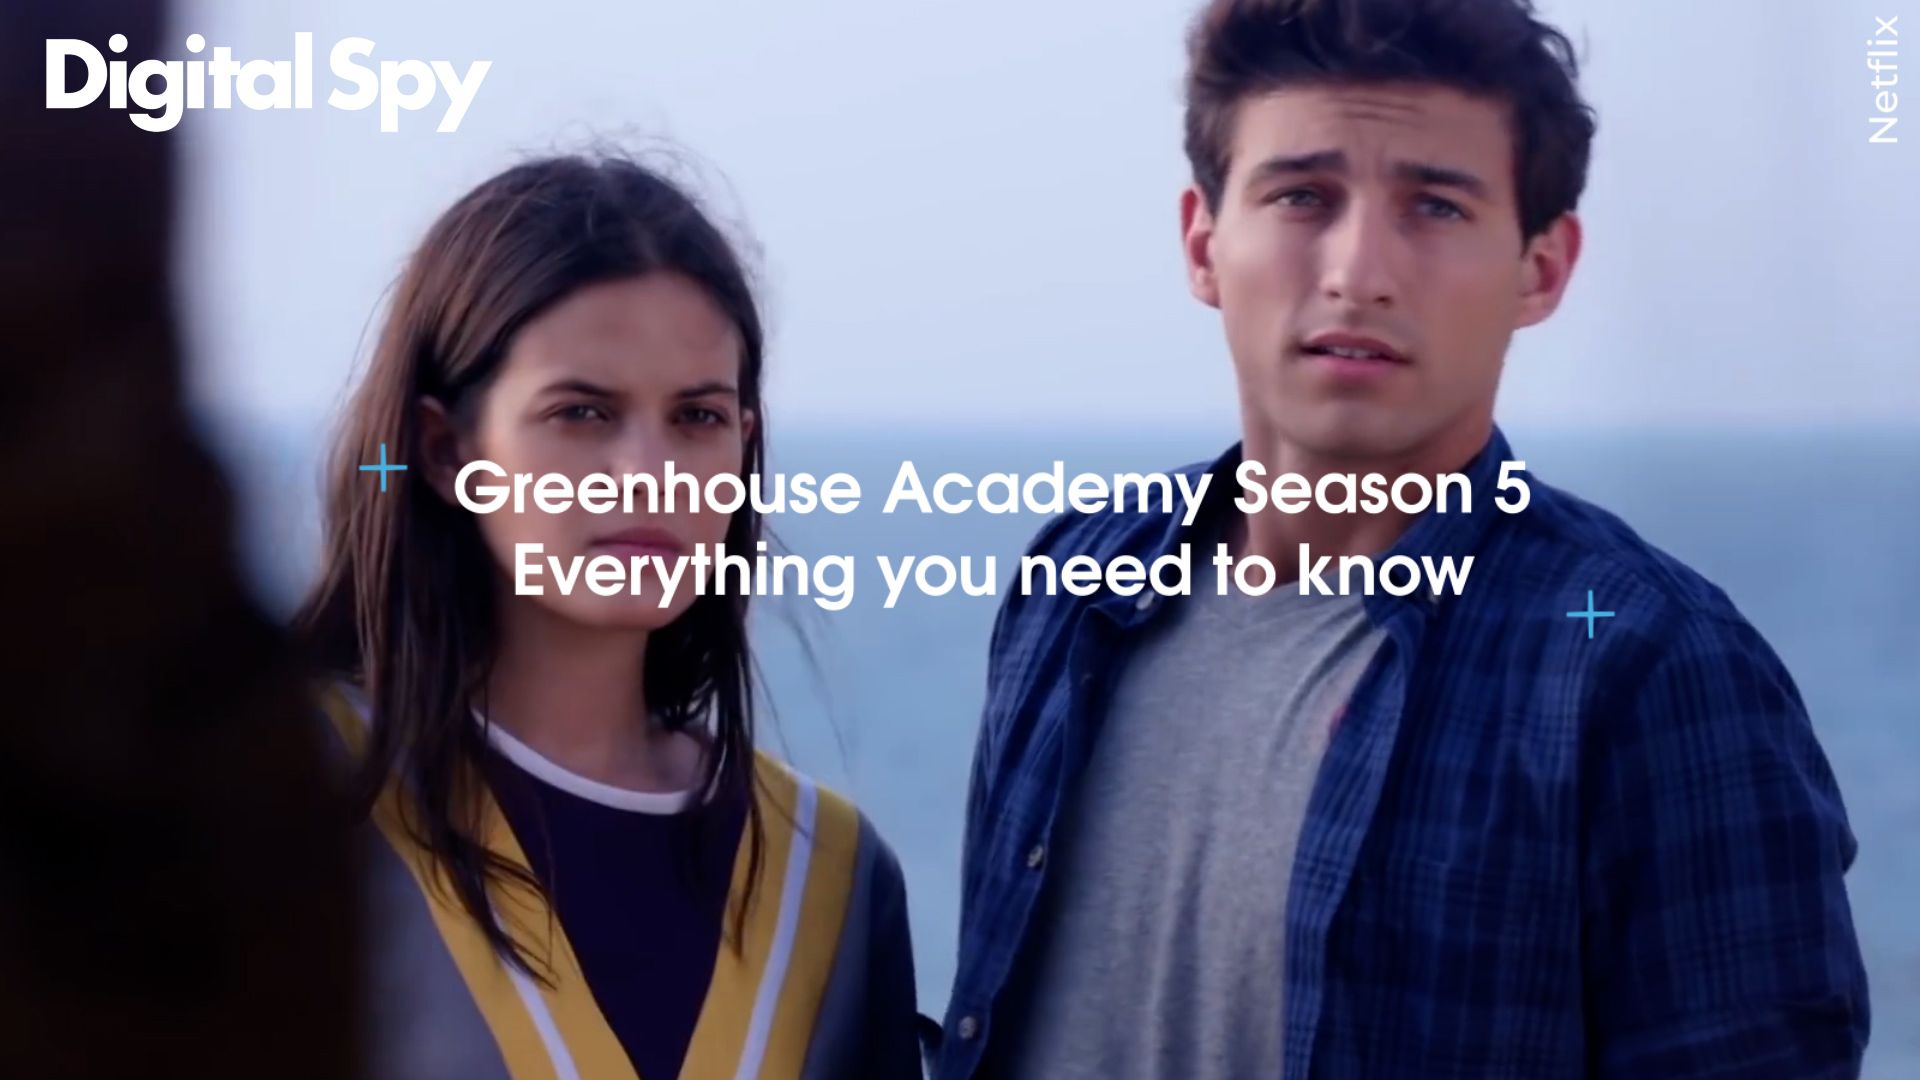 Greenhouse Academy season 5: Everything you need to know